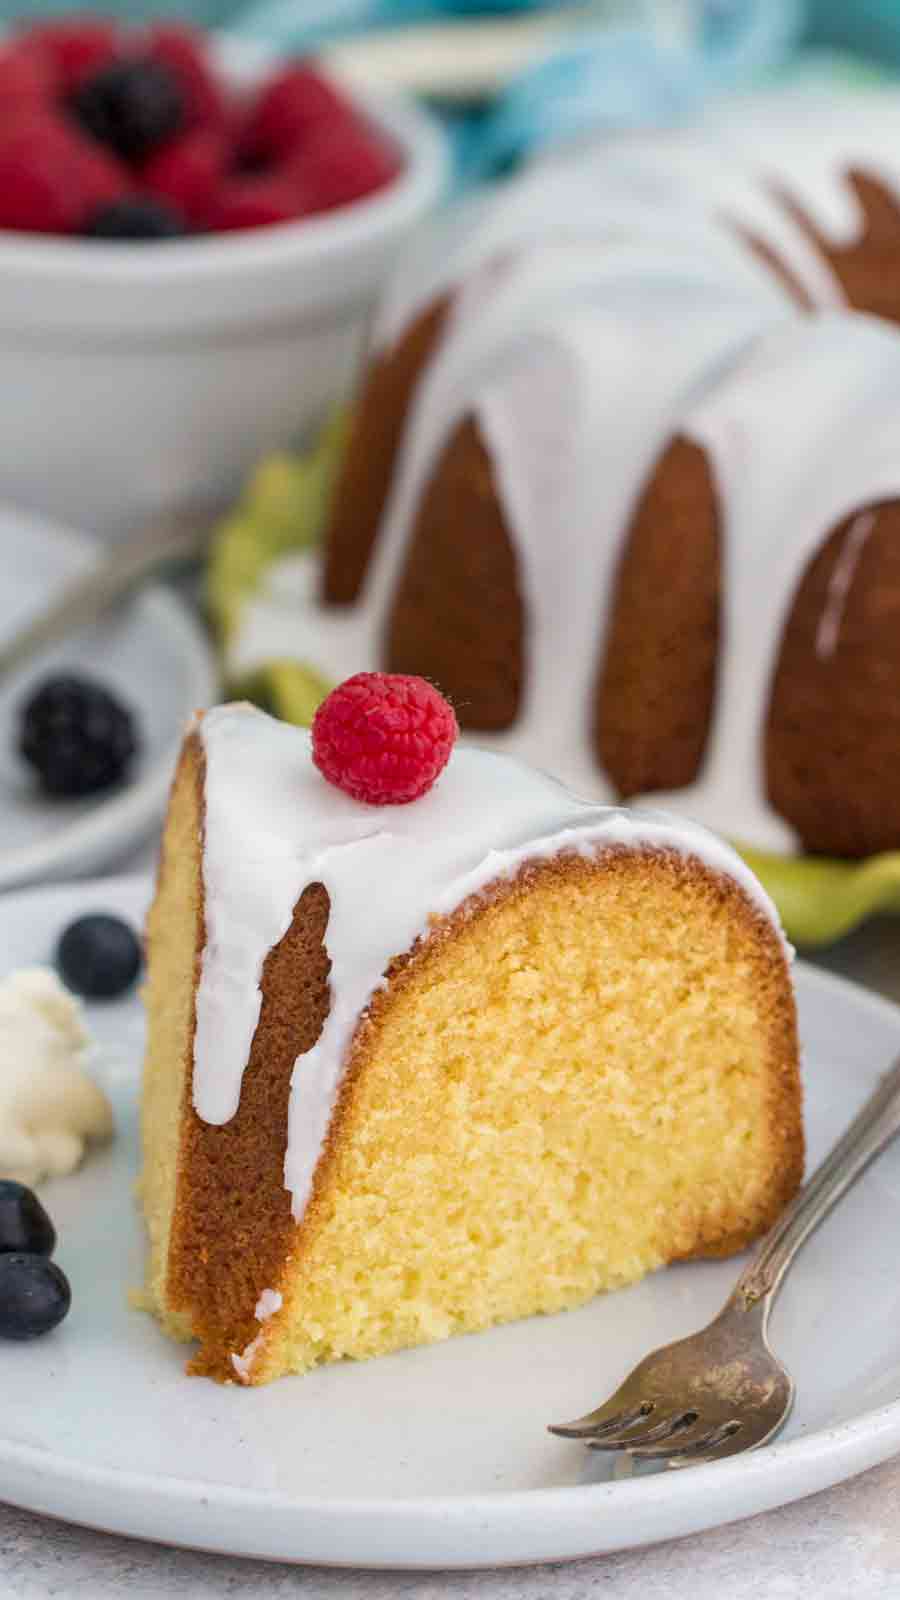 Slice of Vanilla Bundt Cake on white plate with berries and a fork